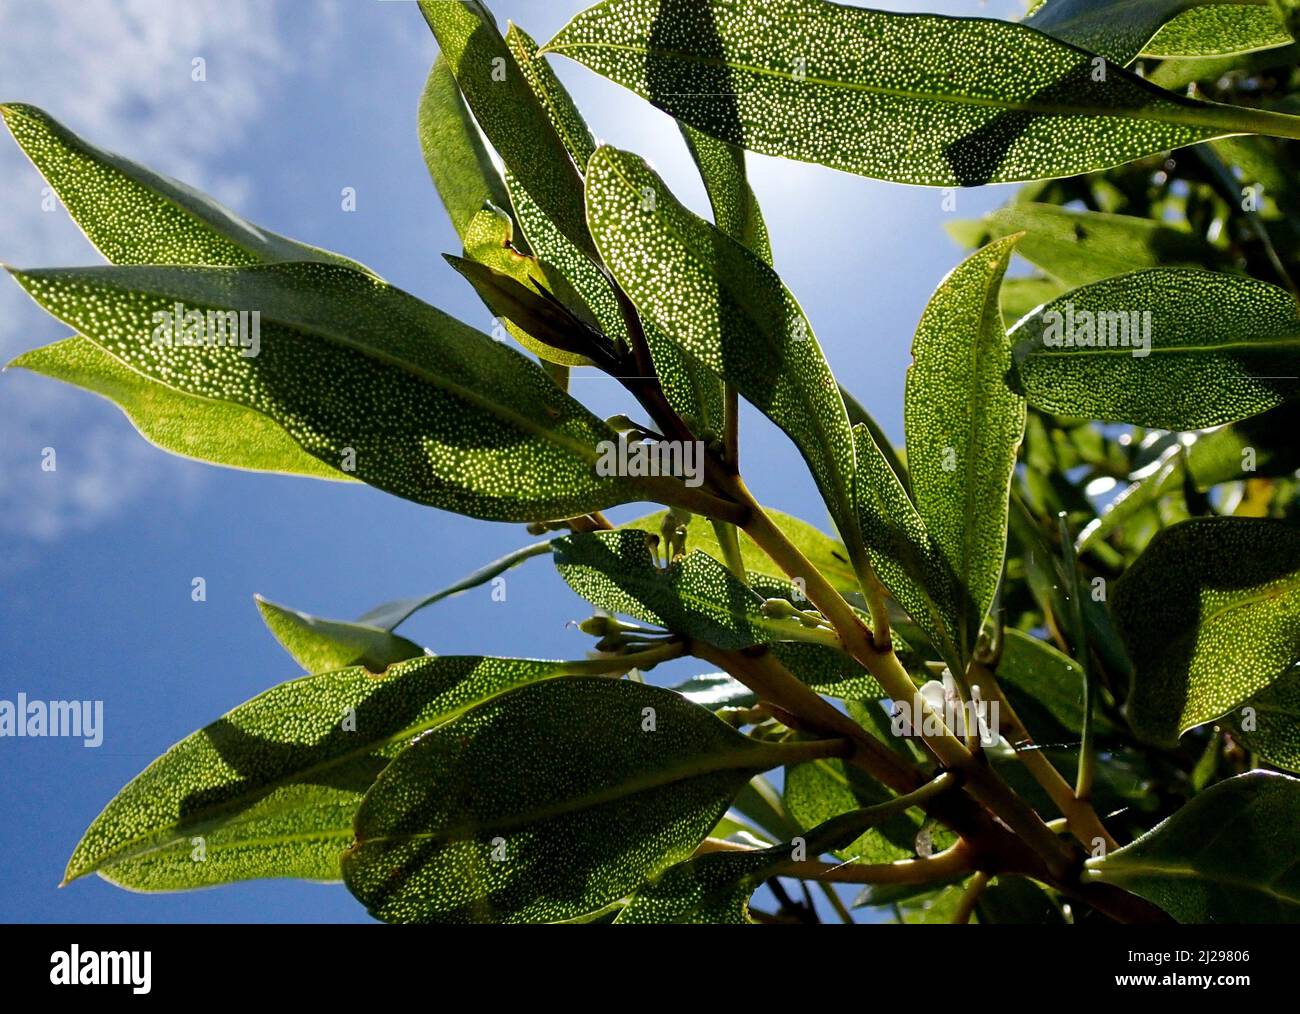 The distinctive oil glands on the leaves of the ngaio tree (Myoporum laetum) backlit against a blue sky in New Zealand Stock Photo